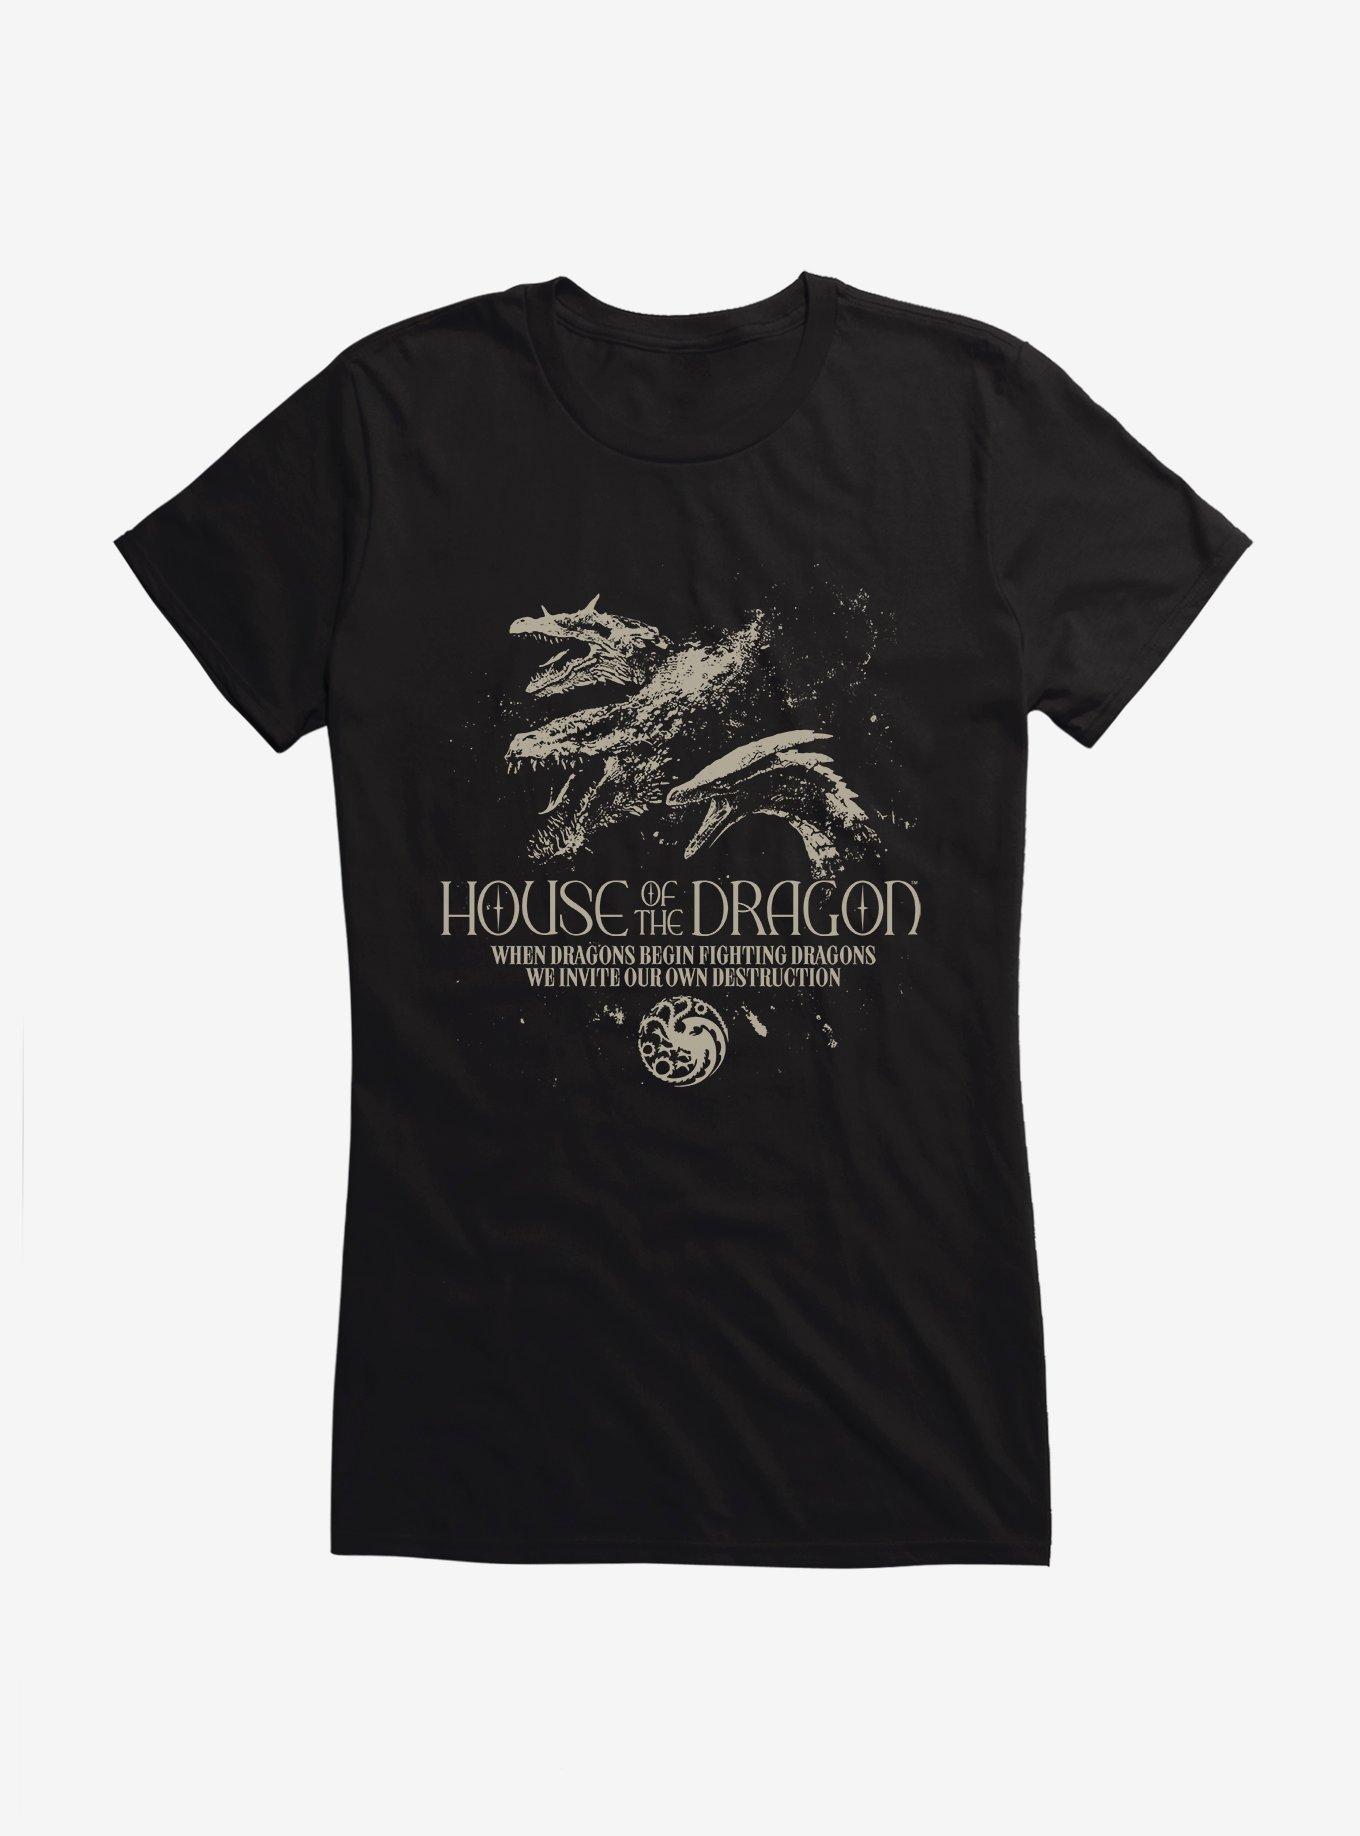 House Of The Dragon Invite Our Own Destruction Girls T-Shirt, BLACK, hi-res